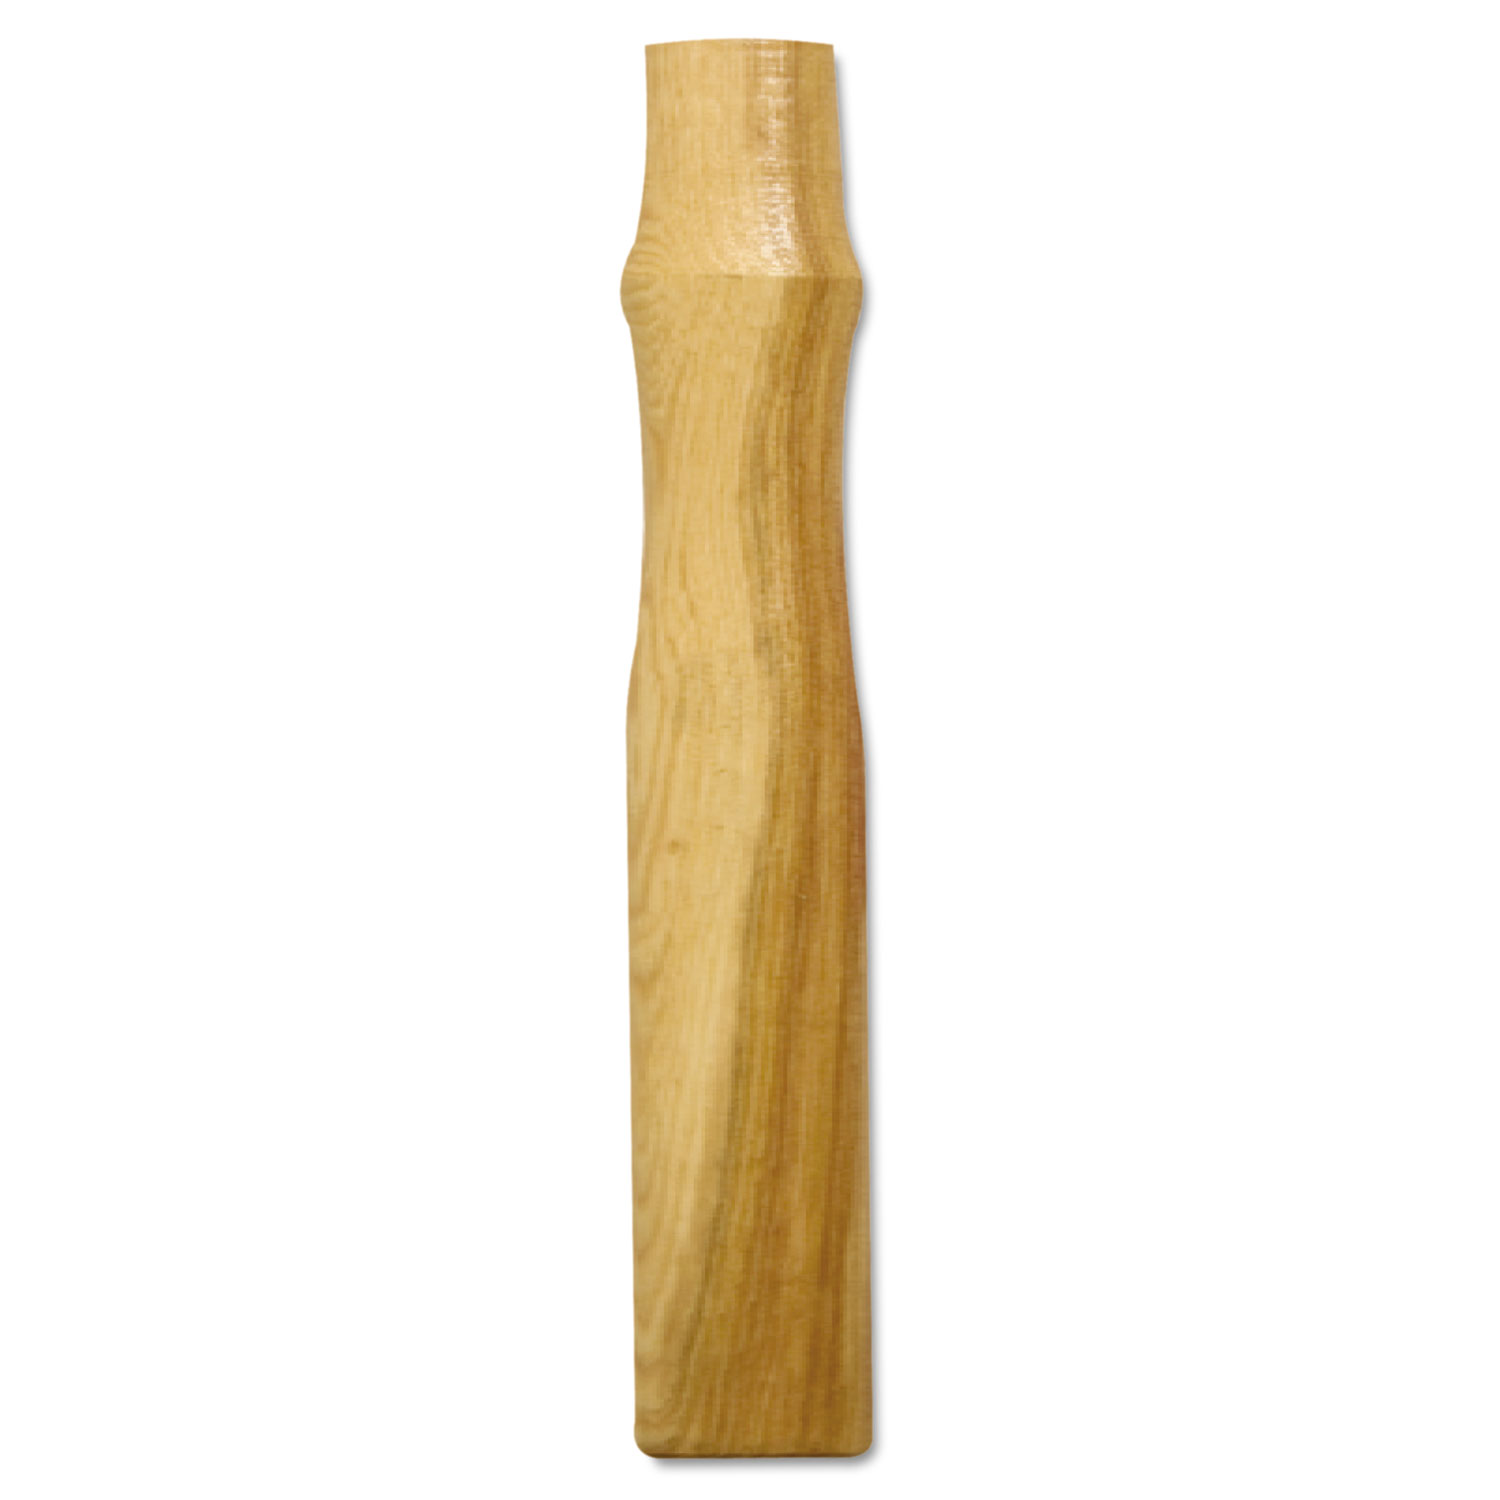 Hickory Hammer Handle, For 6-8lb Engineers, 18 Long